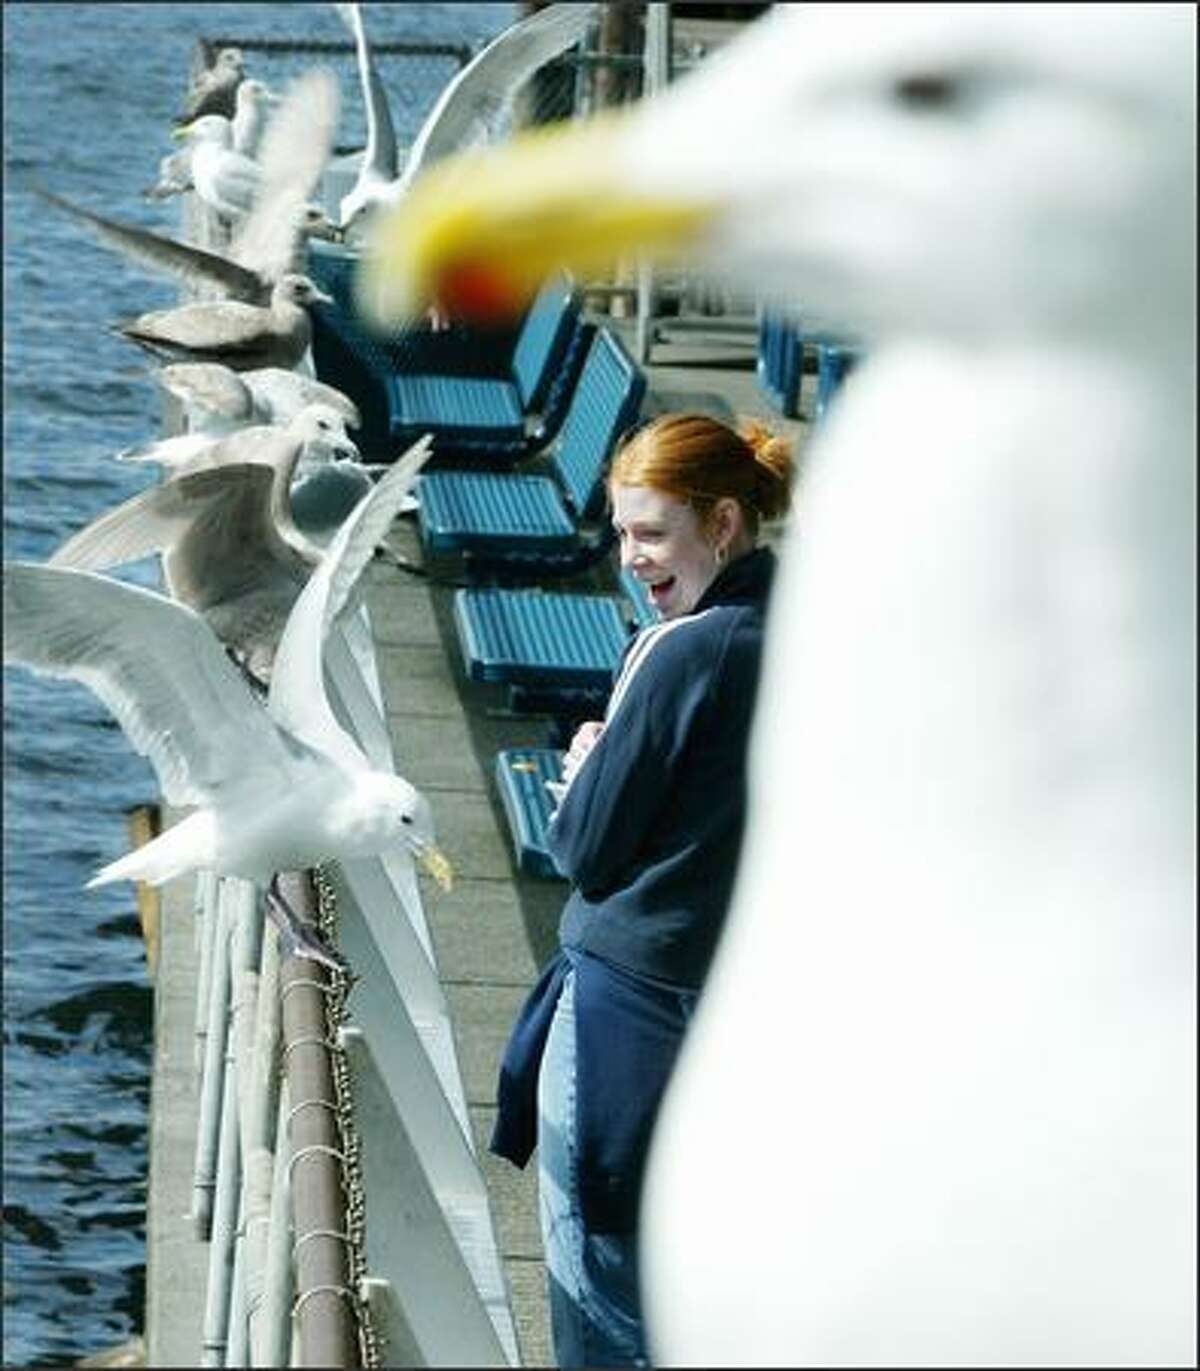 Feeding the sea gulls at Pier 54, as visiting Alisa Thompson of Oregon does here yesterday, has been a long-standing Ivar's tradition.